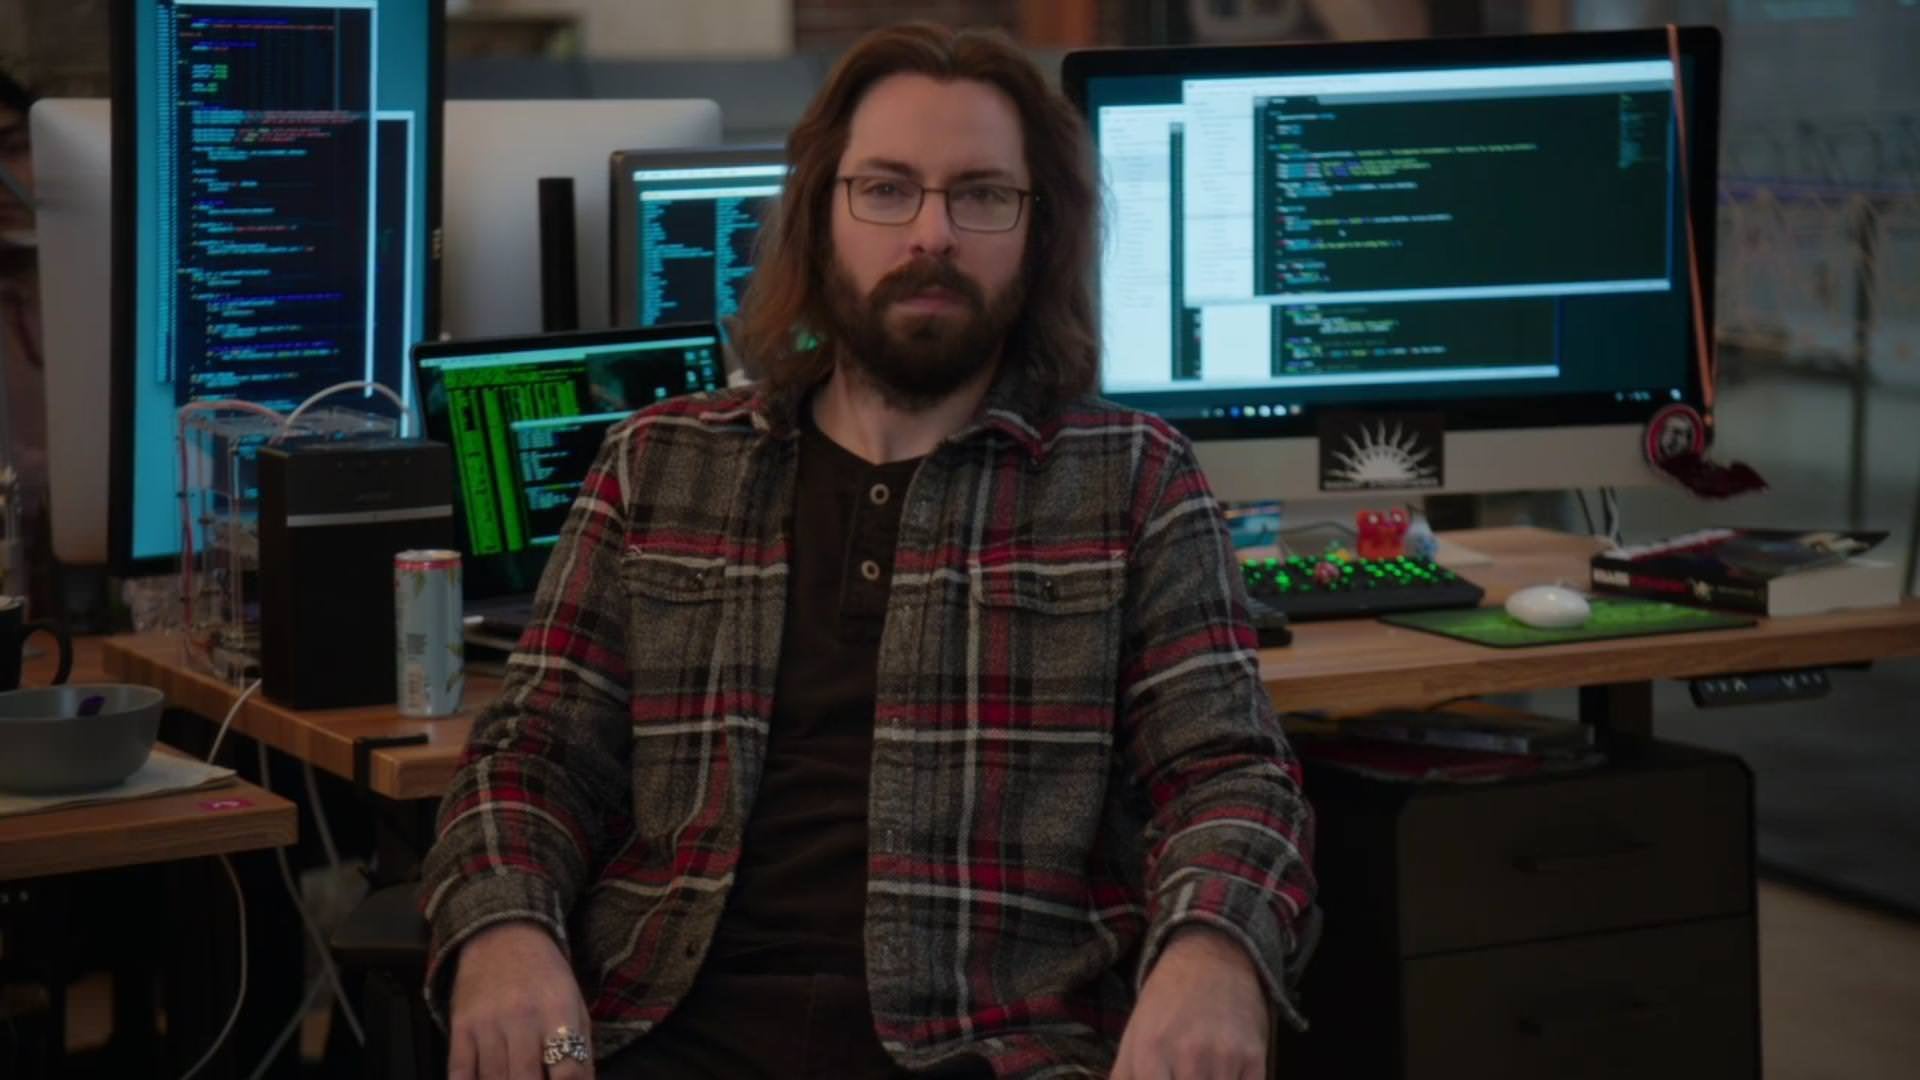 Gilfoyle can be seen running Windows on an iMac. Now that is what i call being a total badass